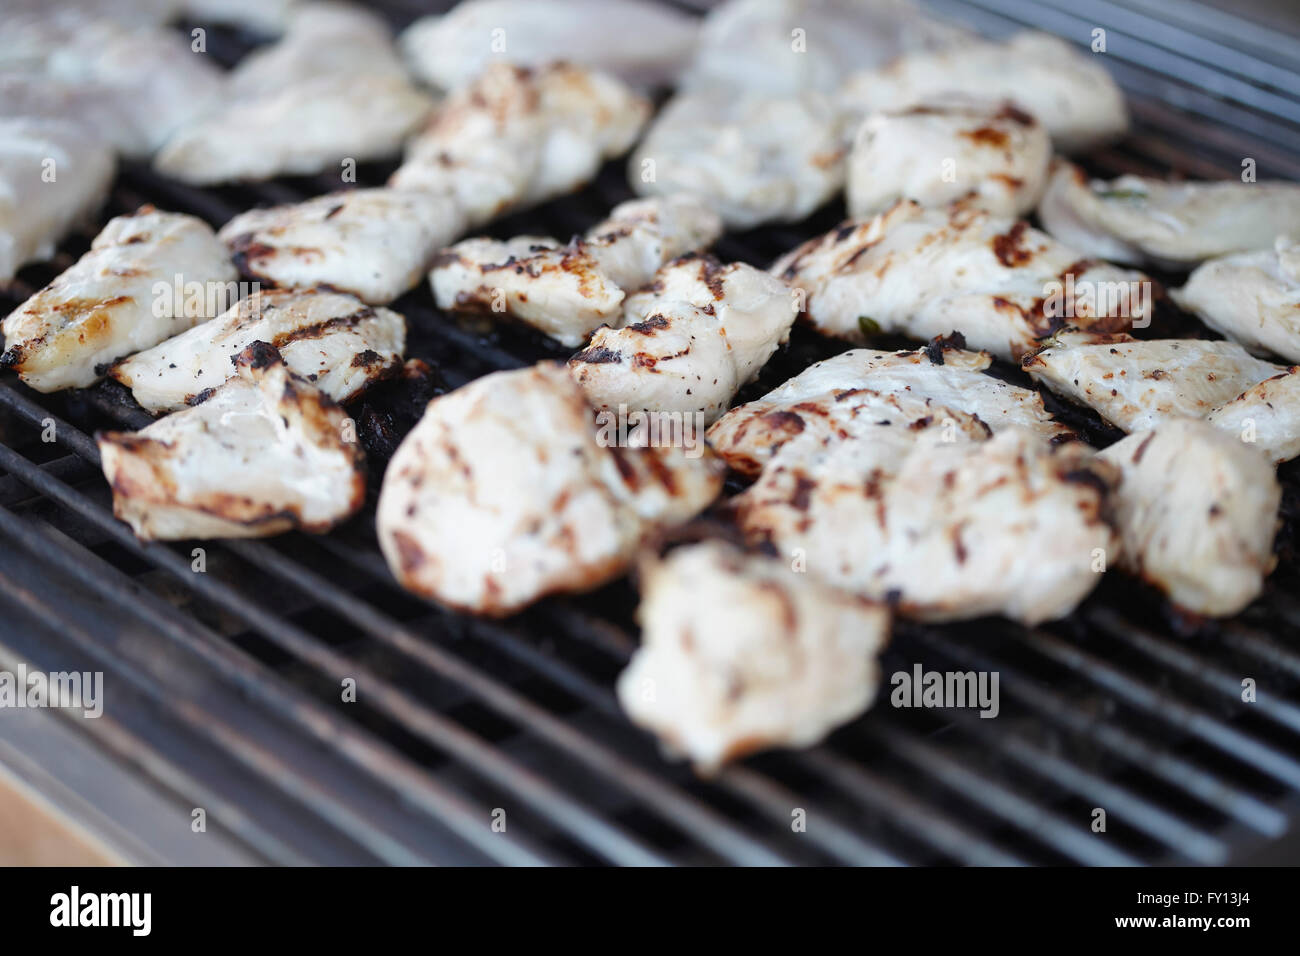 Close-up of grilled chicken meat on barbeque grill Stock Photo